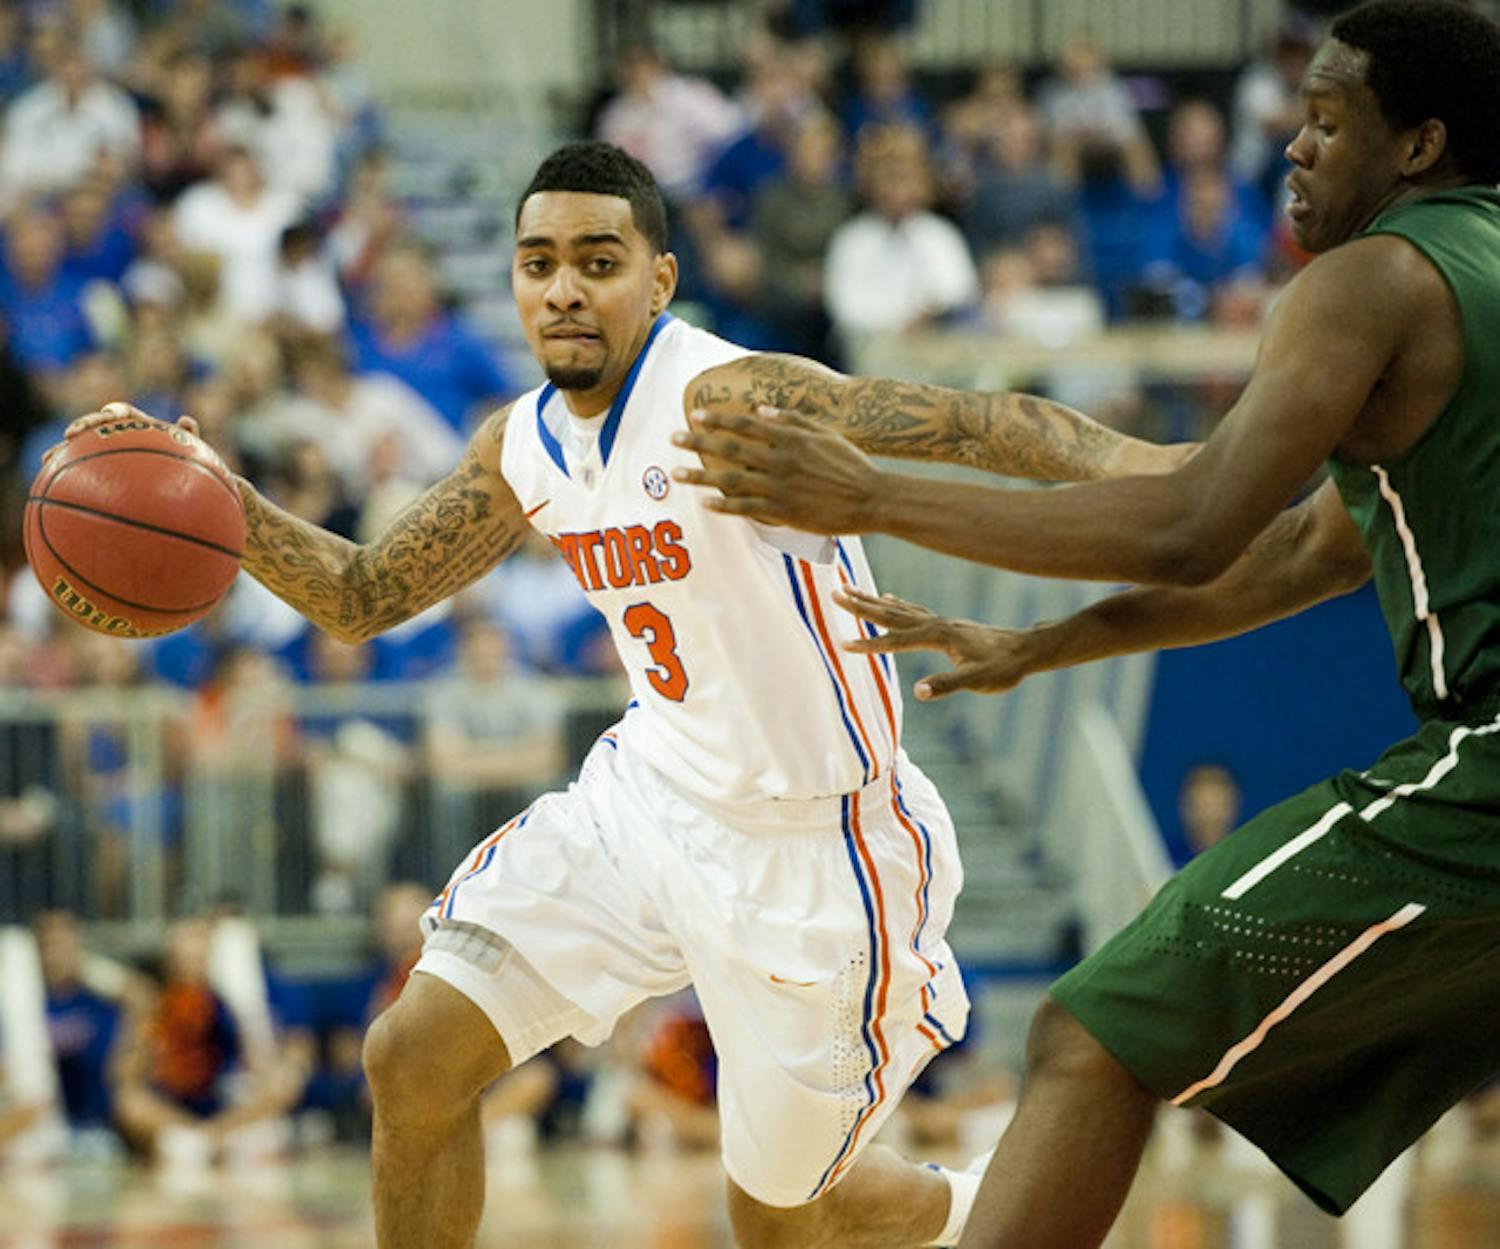 Florida junior guard Mike Rosario said he is still adjusting to his role with the Gators after sitting out for a year following his transfer from Rutgers.